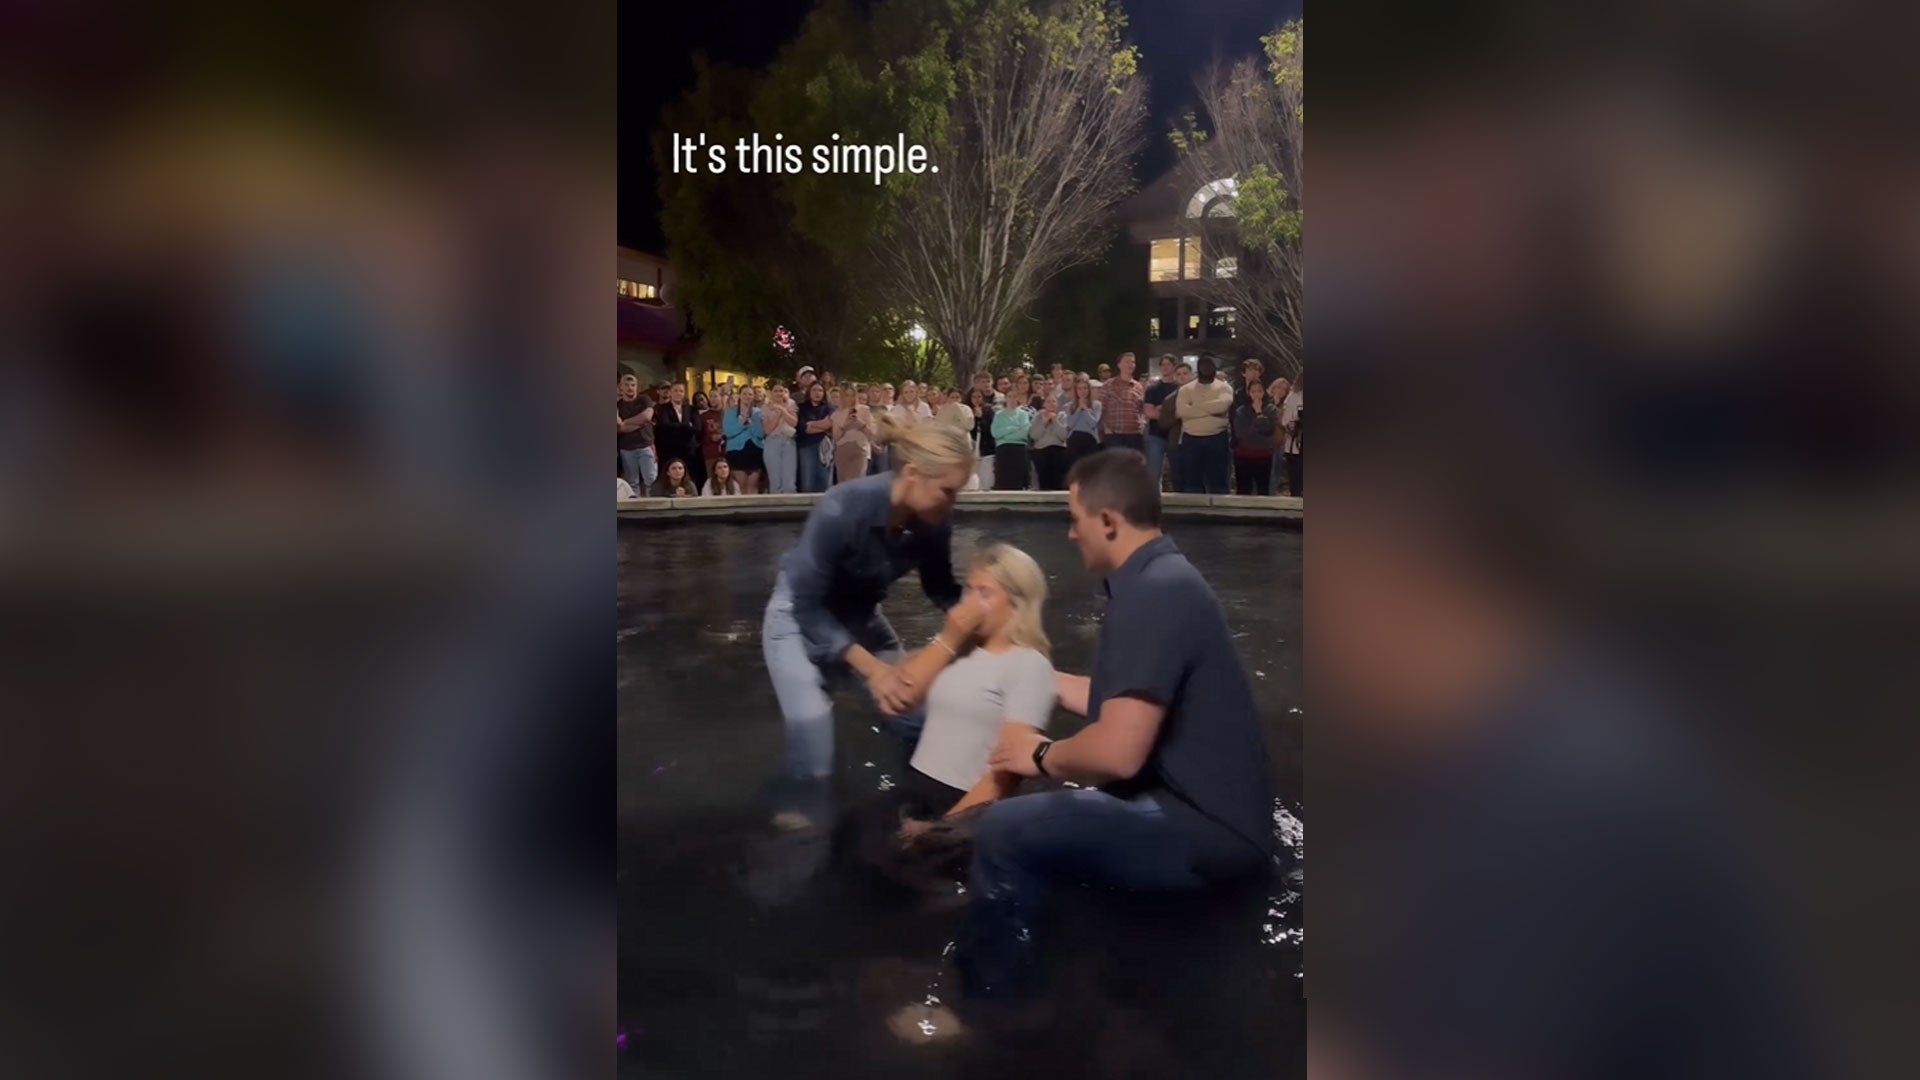 'It's happened again!'  Hundreds were baptized in the recent campus revival, now at the University of Alabama